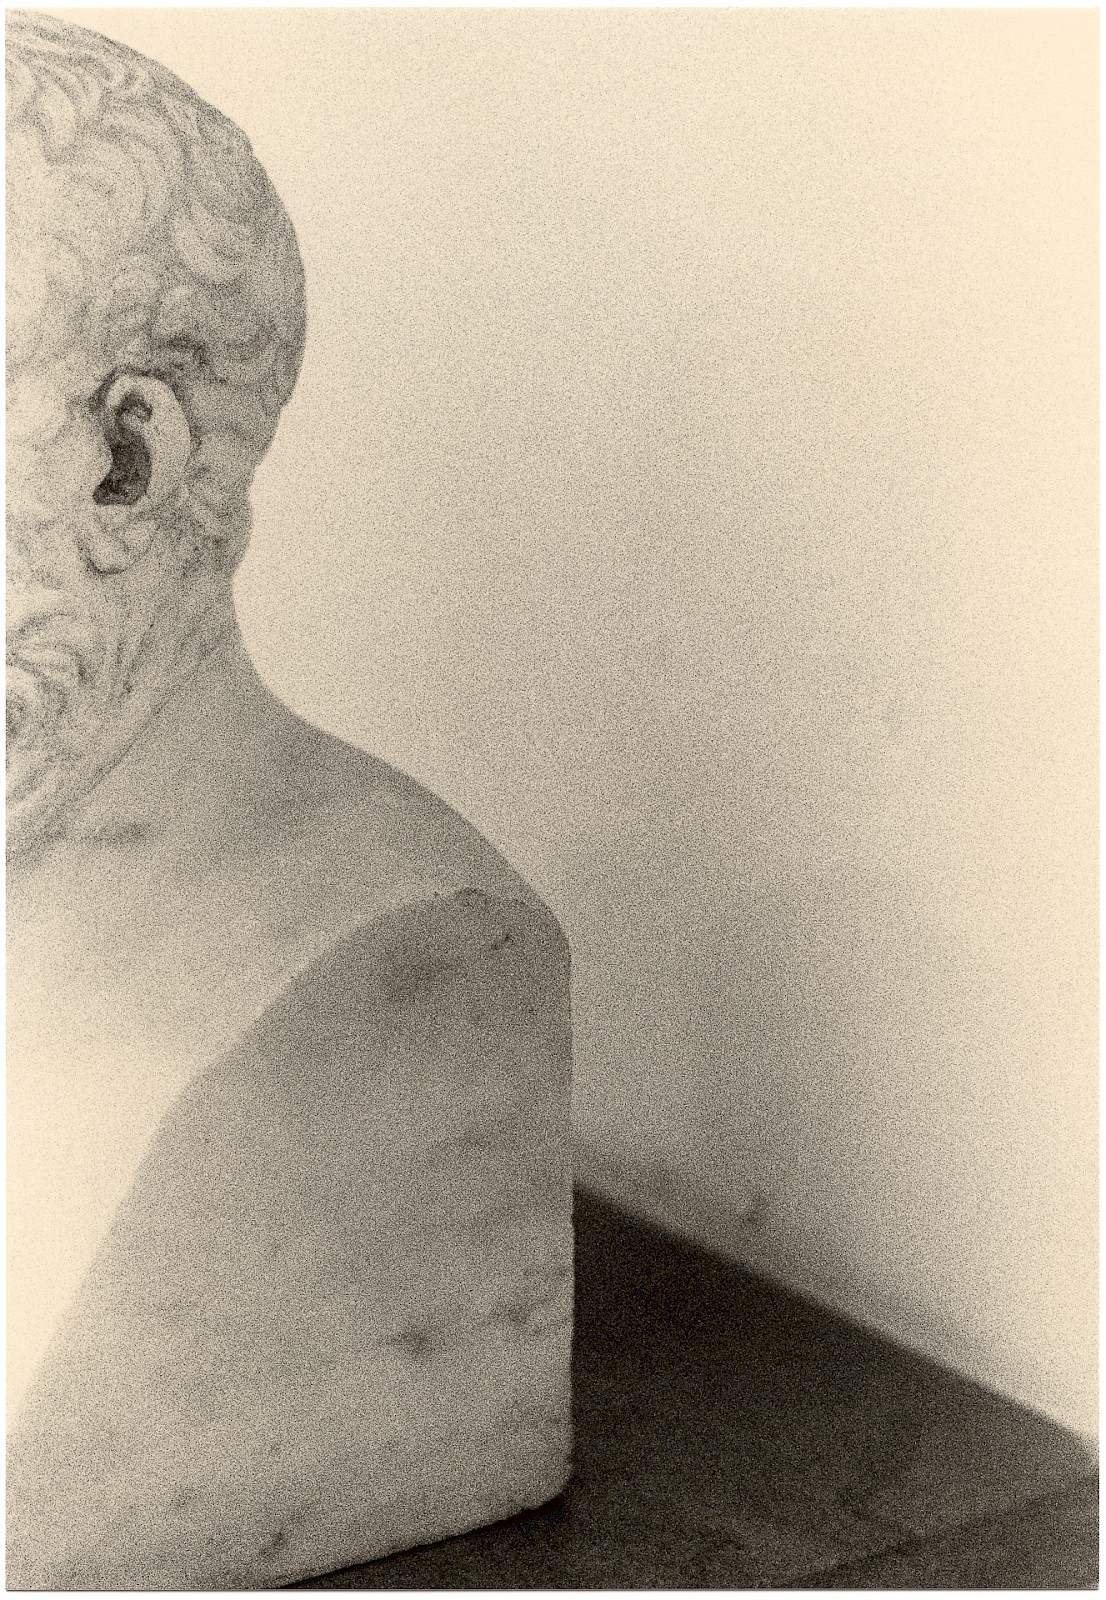 Untitled (bust and ear), silver gelatin photograph by Mikael Siirilä